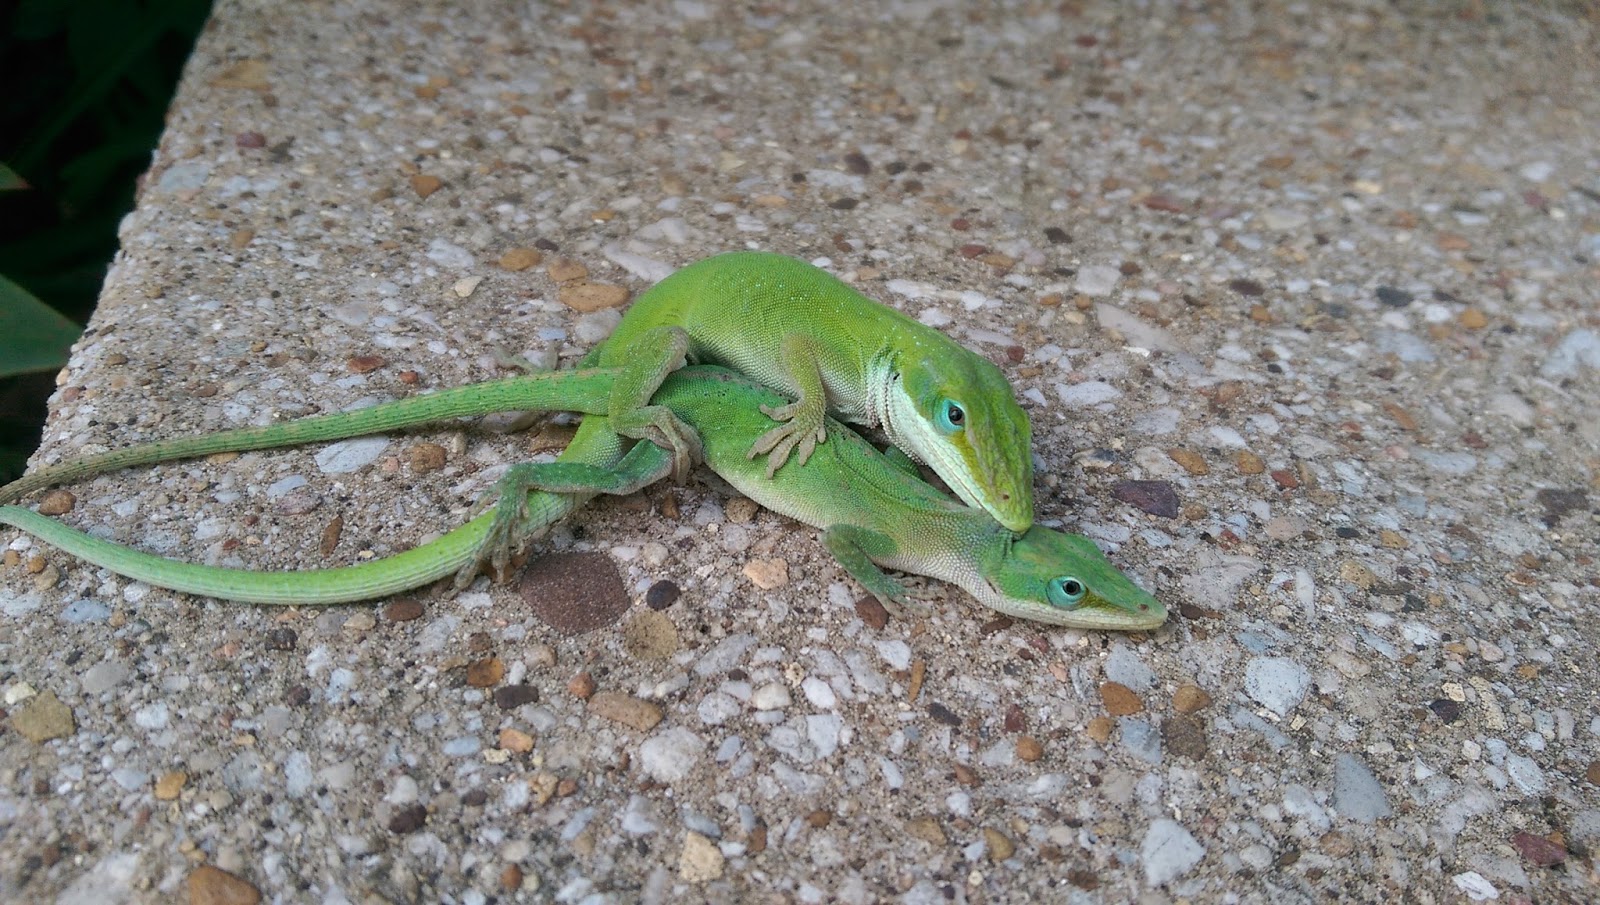 I came out of work August 3 to find these two Green Anole Lizards mating on...